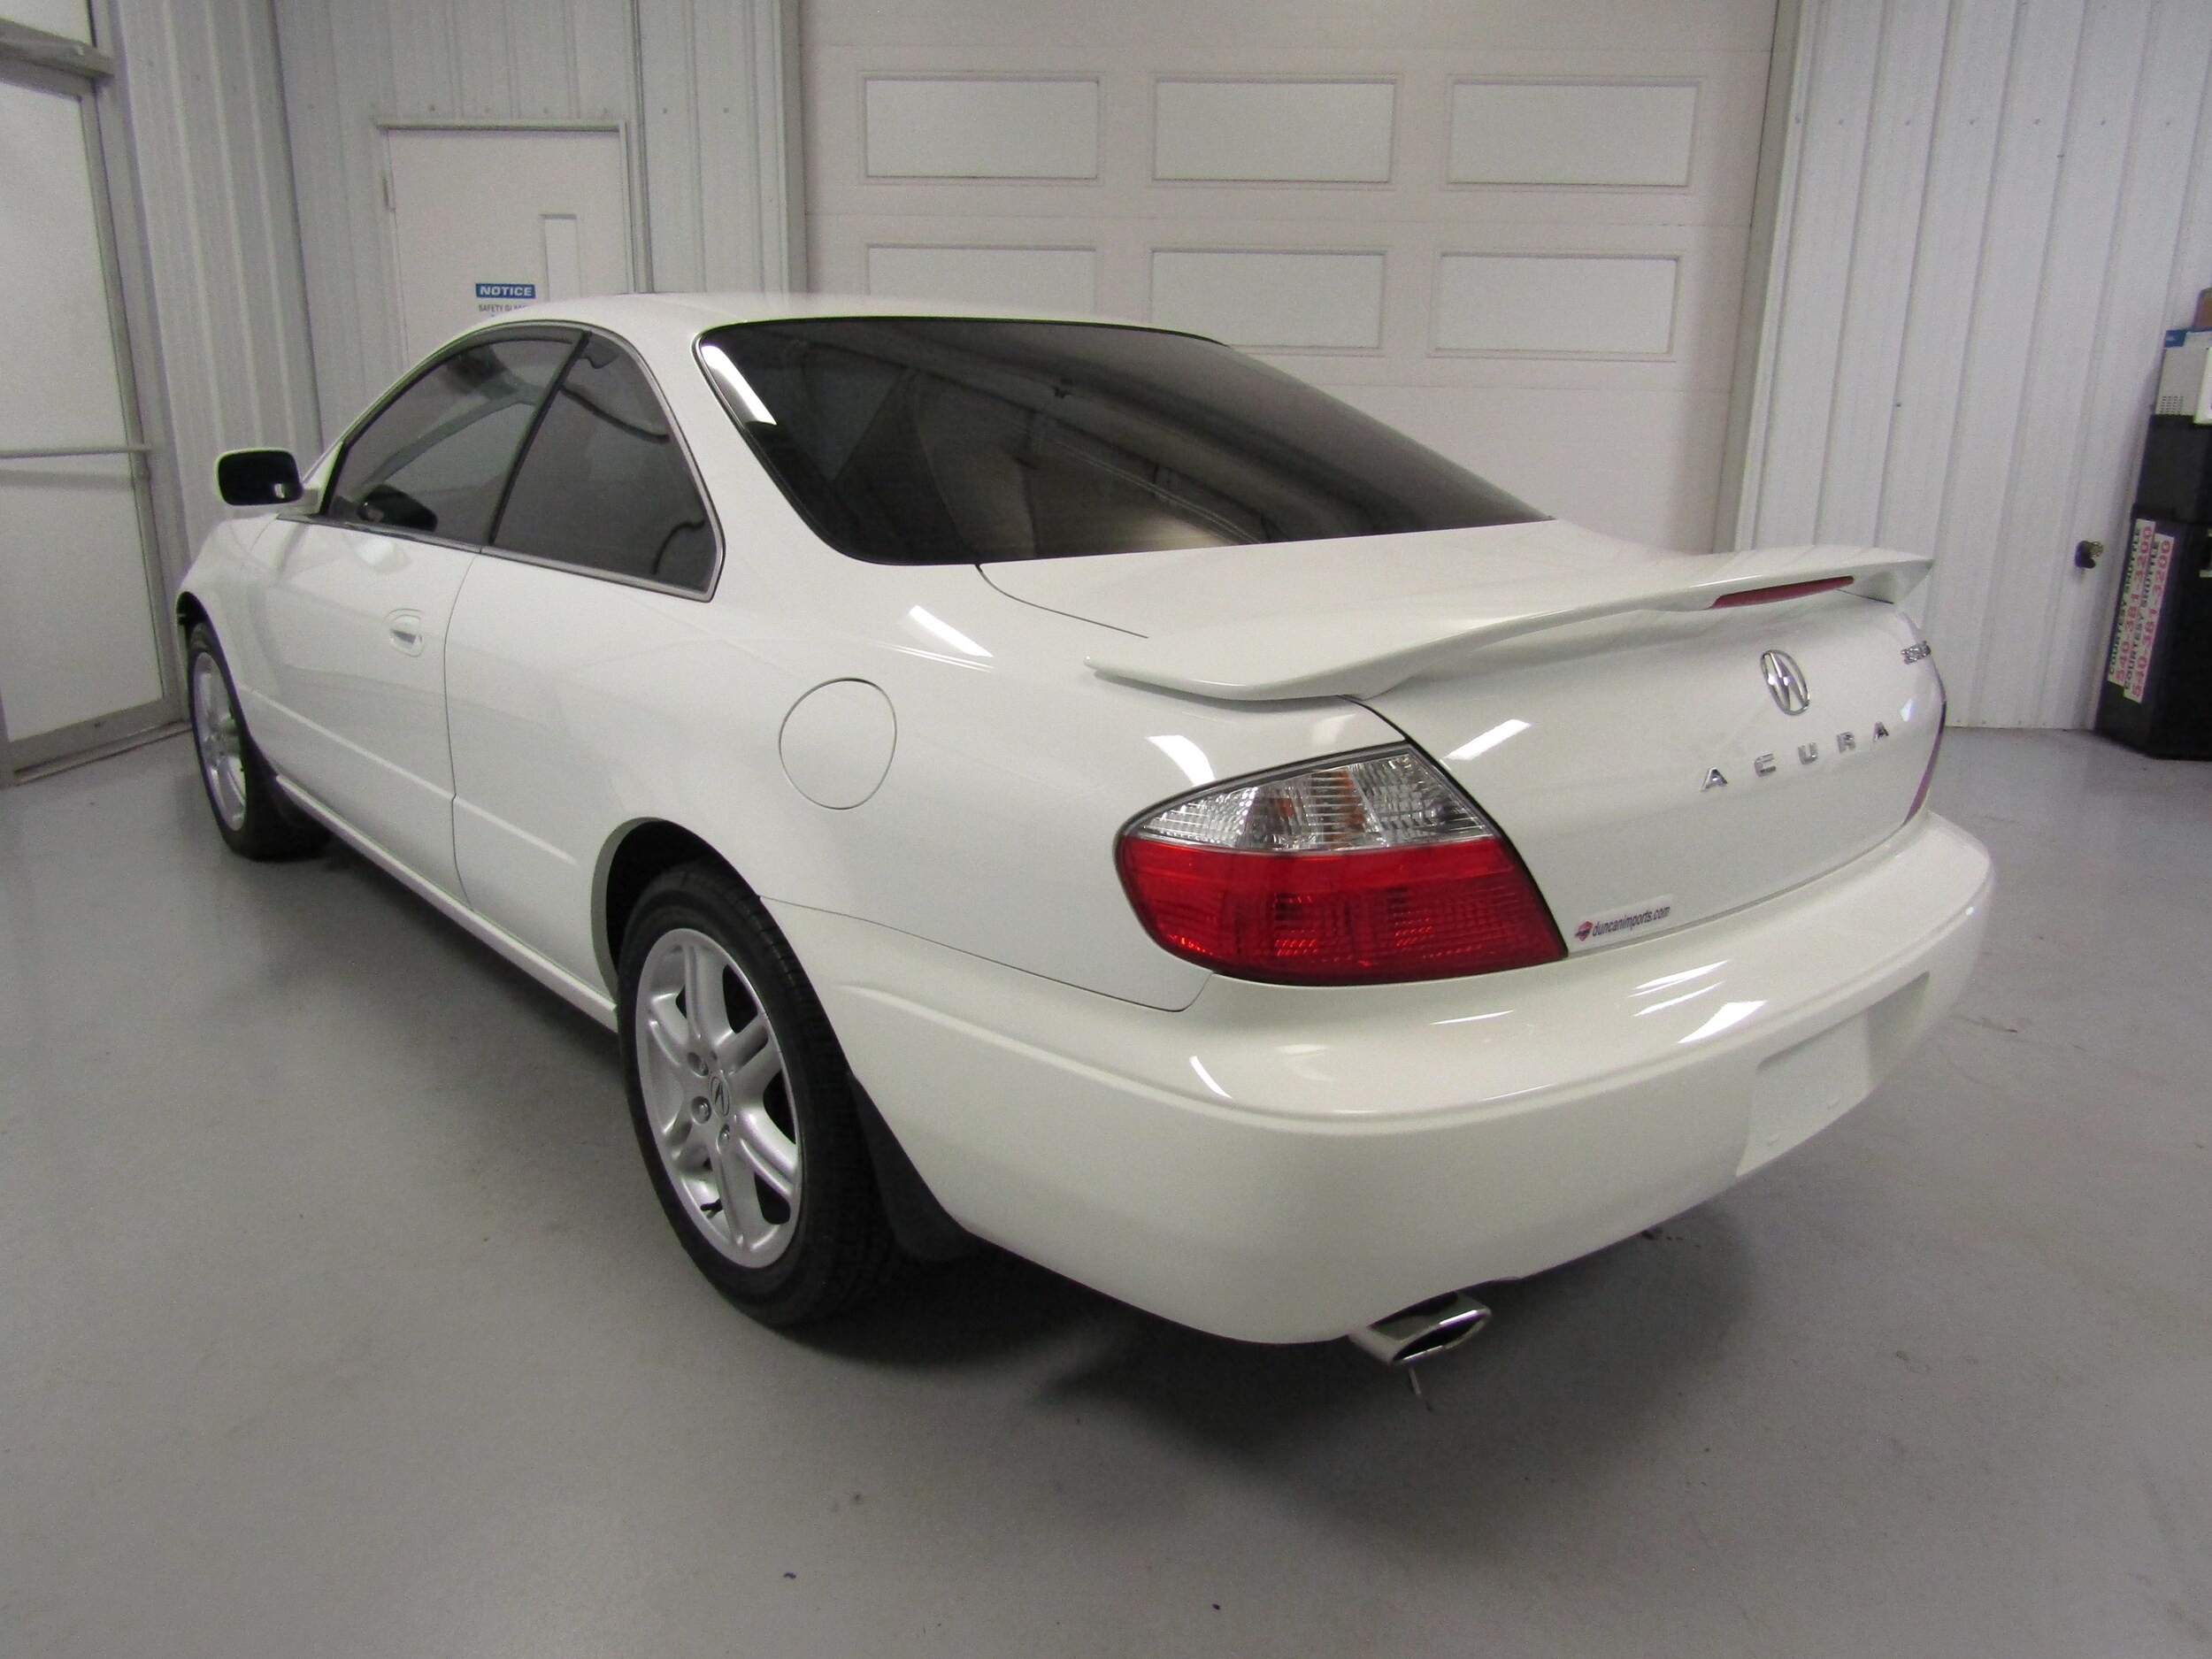 Used 2003 Acura Cl For Sale At Duncan Imports And Classic